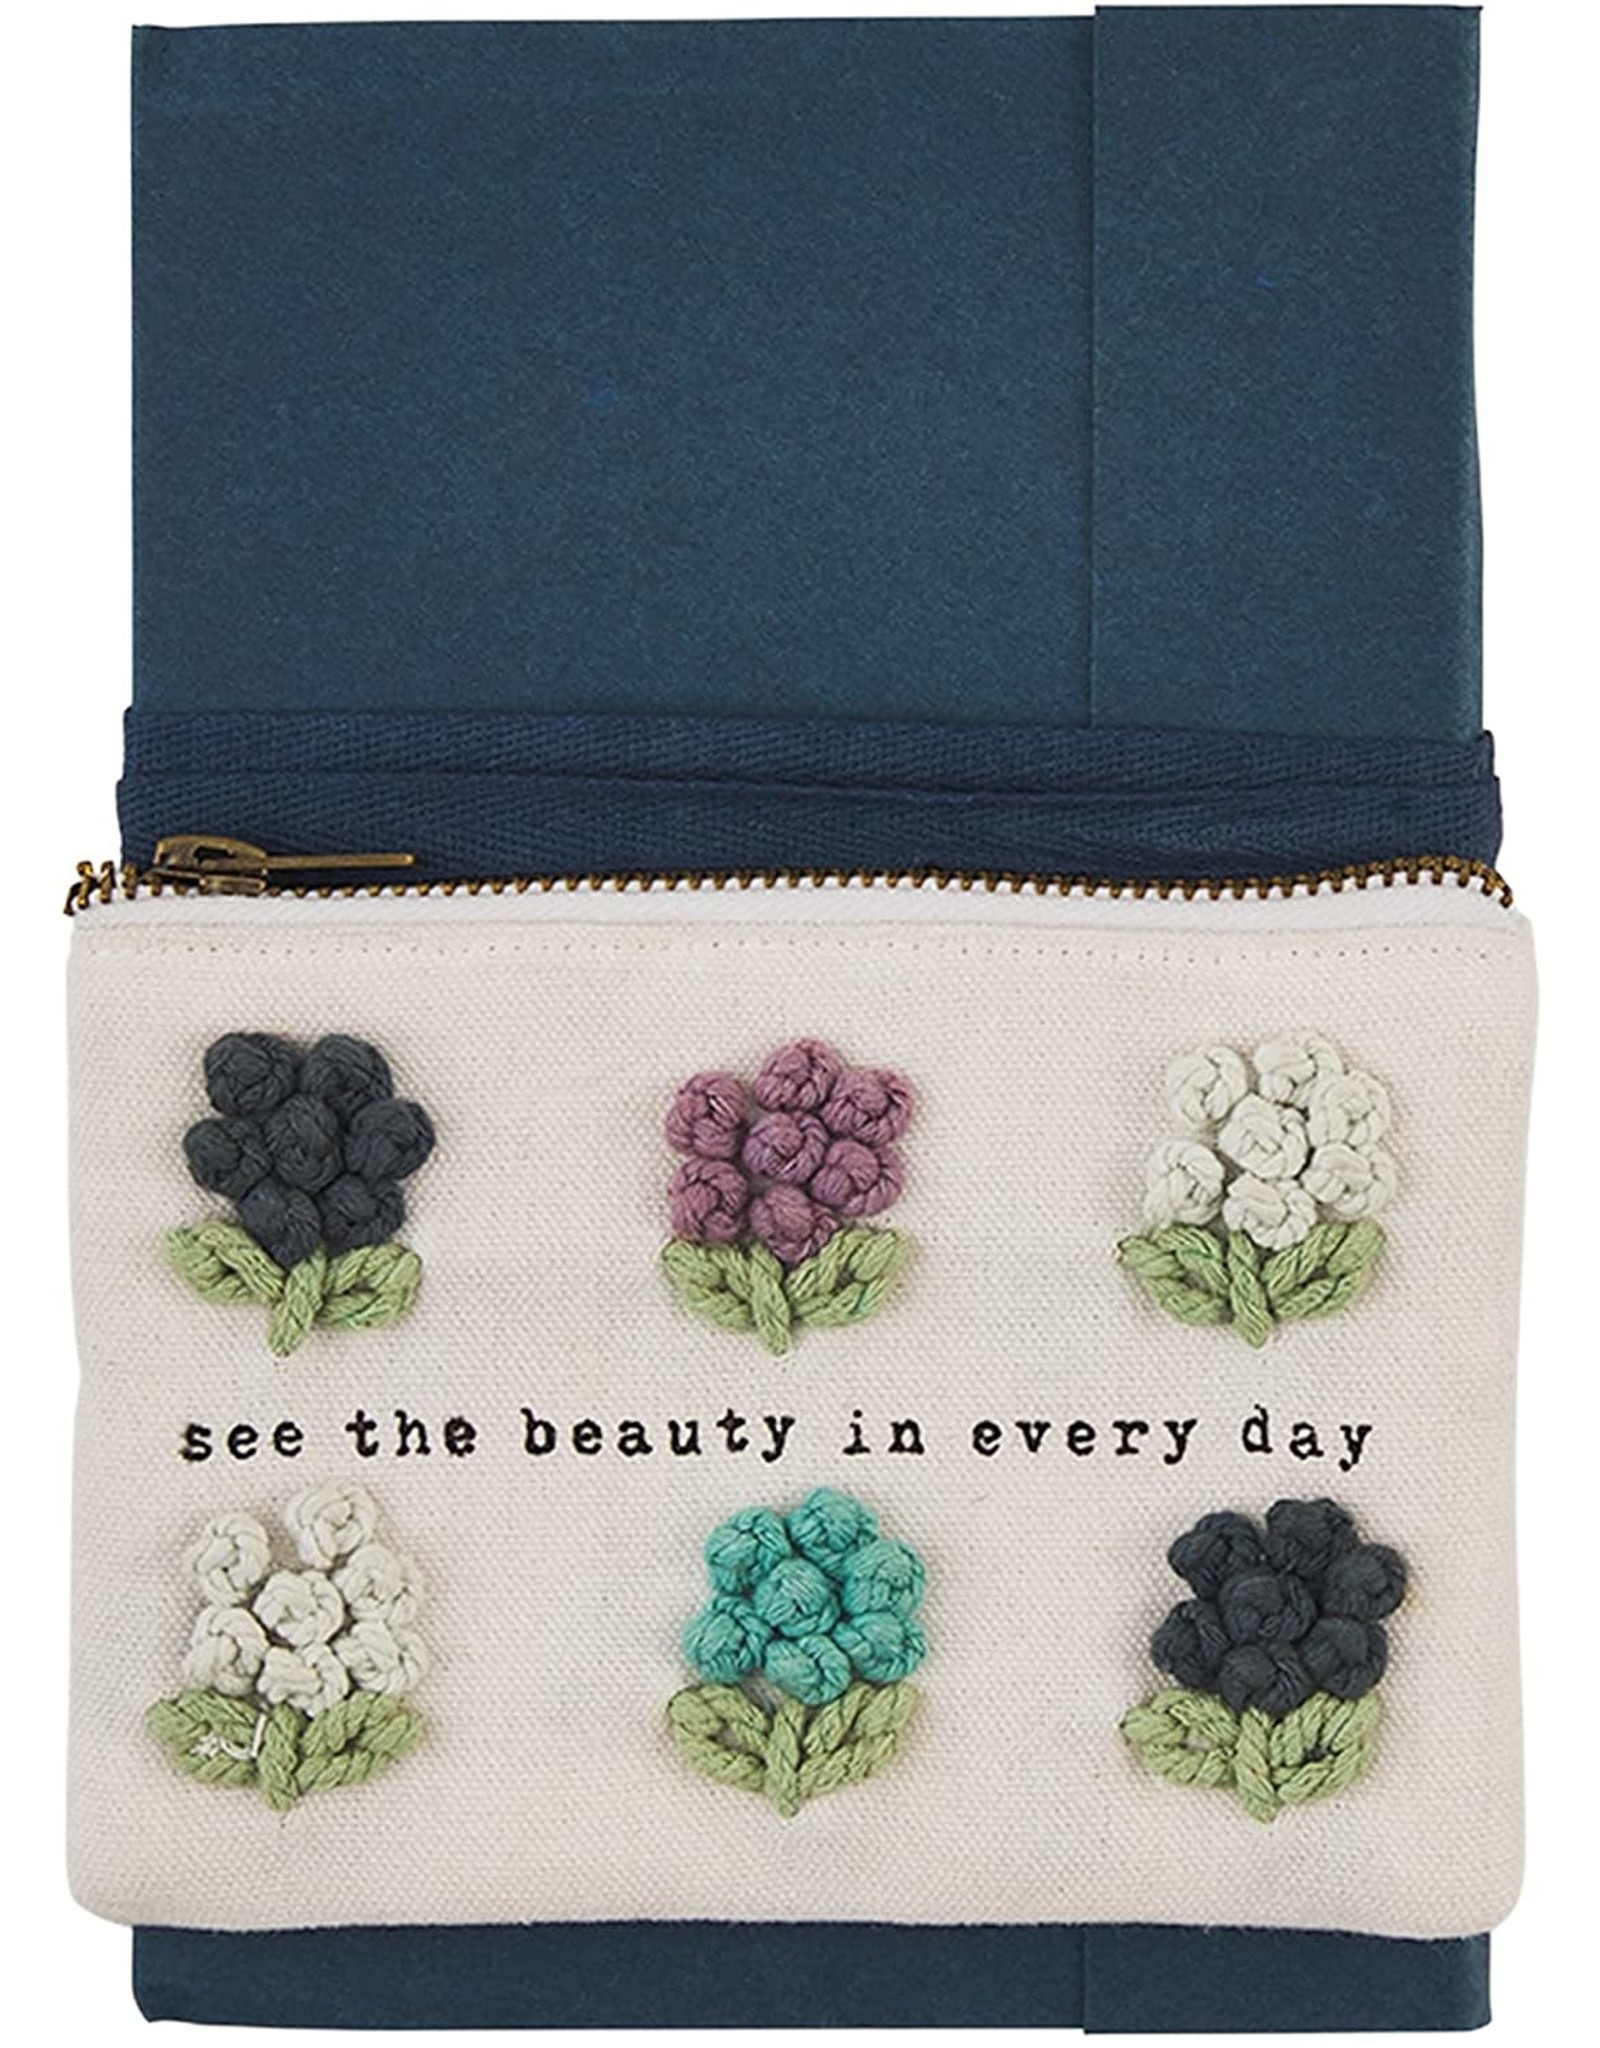 Mud Pie Colorful Journal W Pouch Gift Set See The Beauty In Every Day